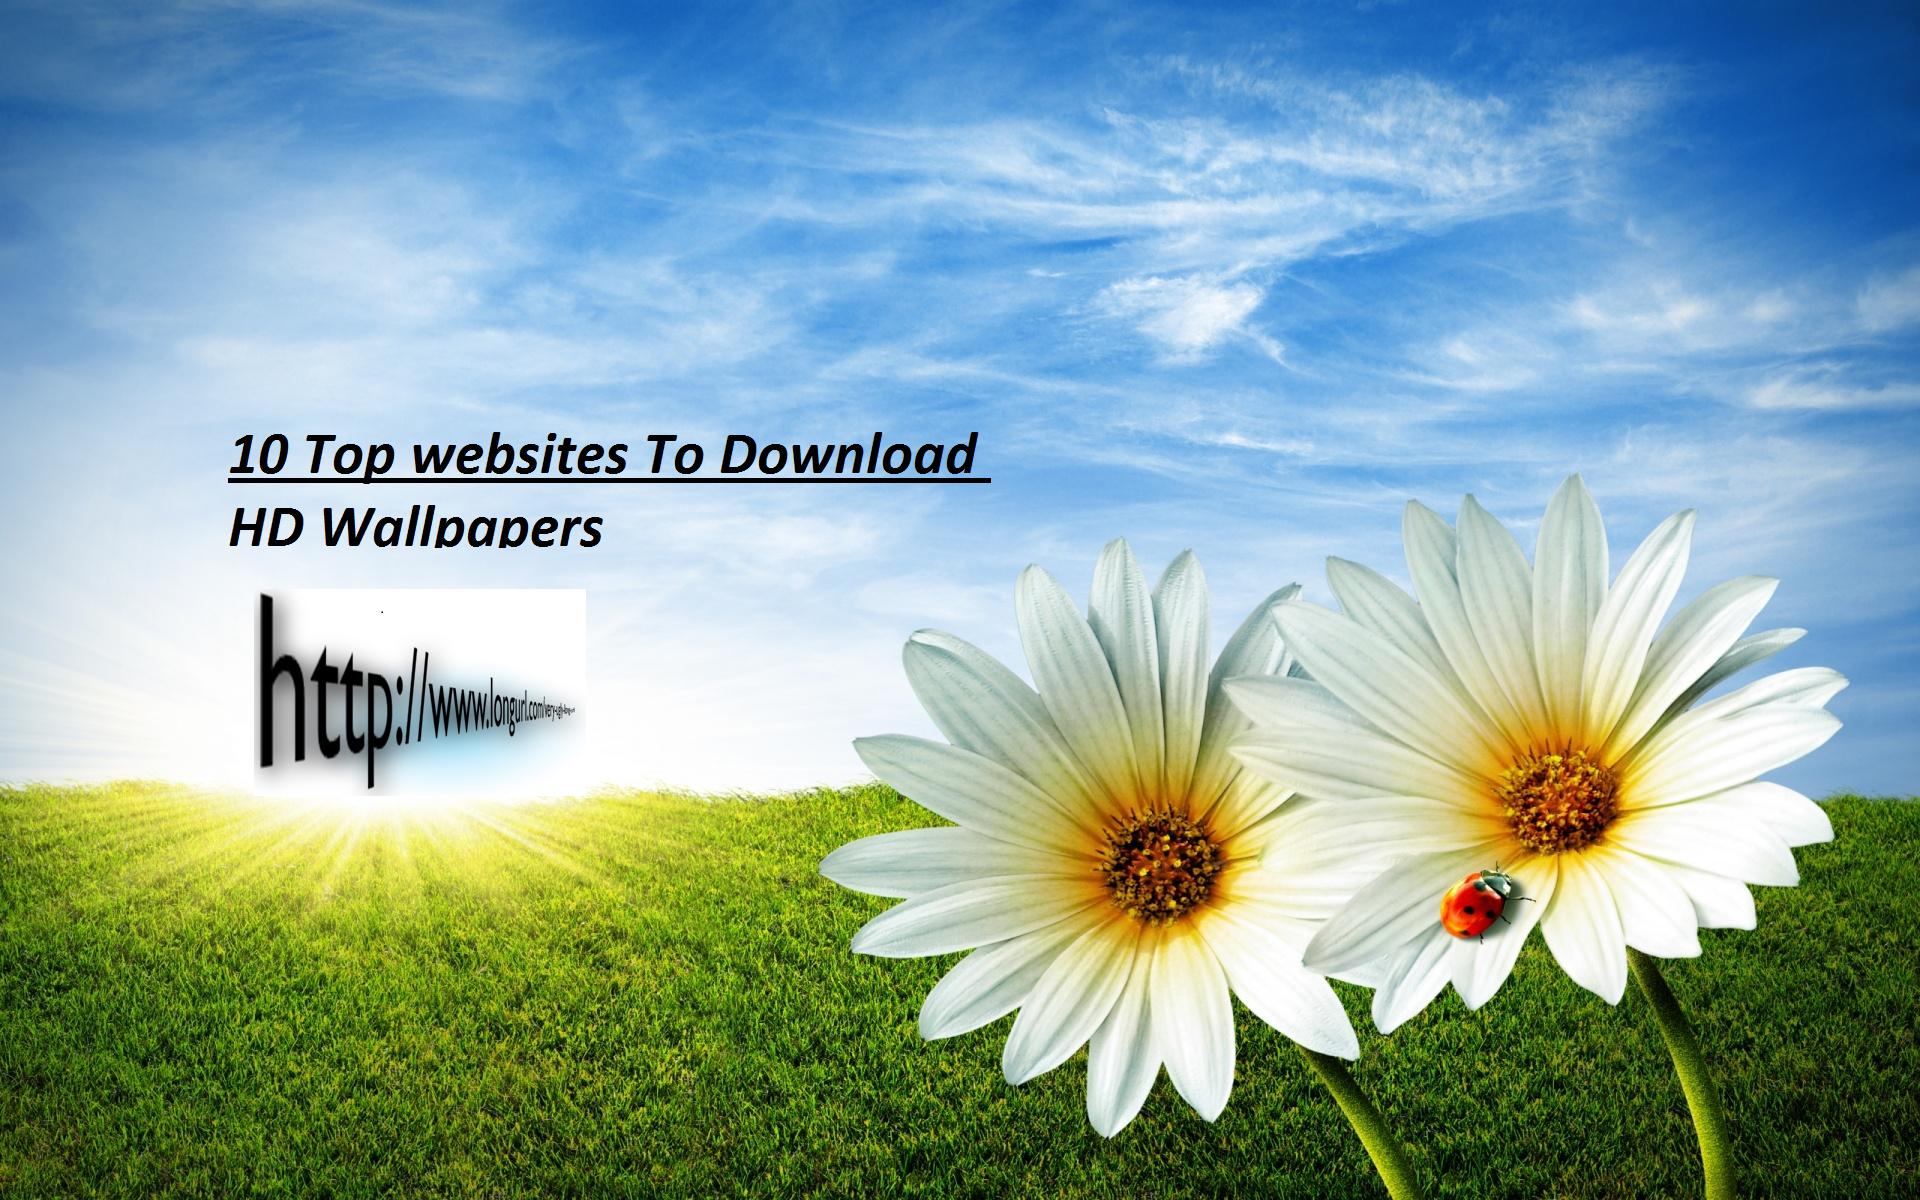 Top 10 Free HD Wallpapers Websites 2015 | Round Pulse